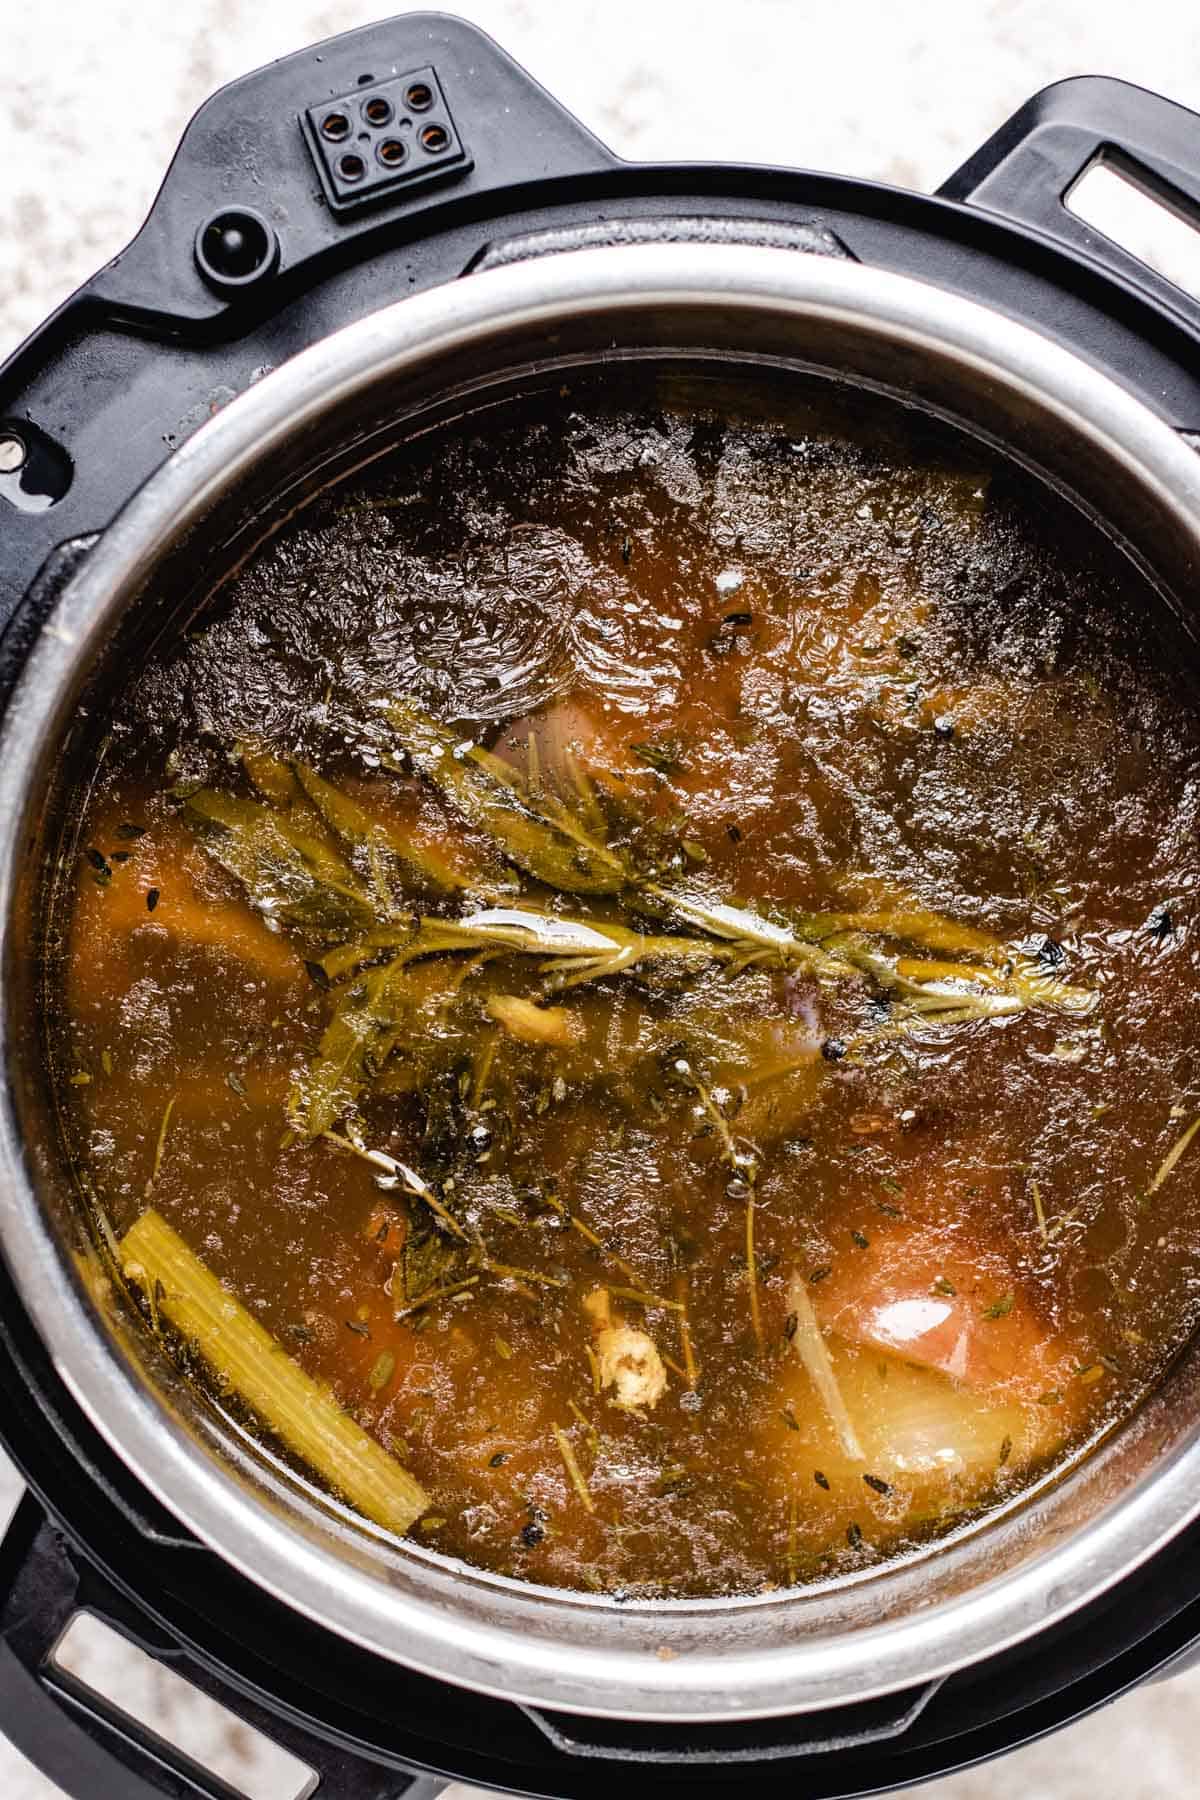 Turkey stock made in instant pot.